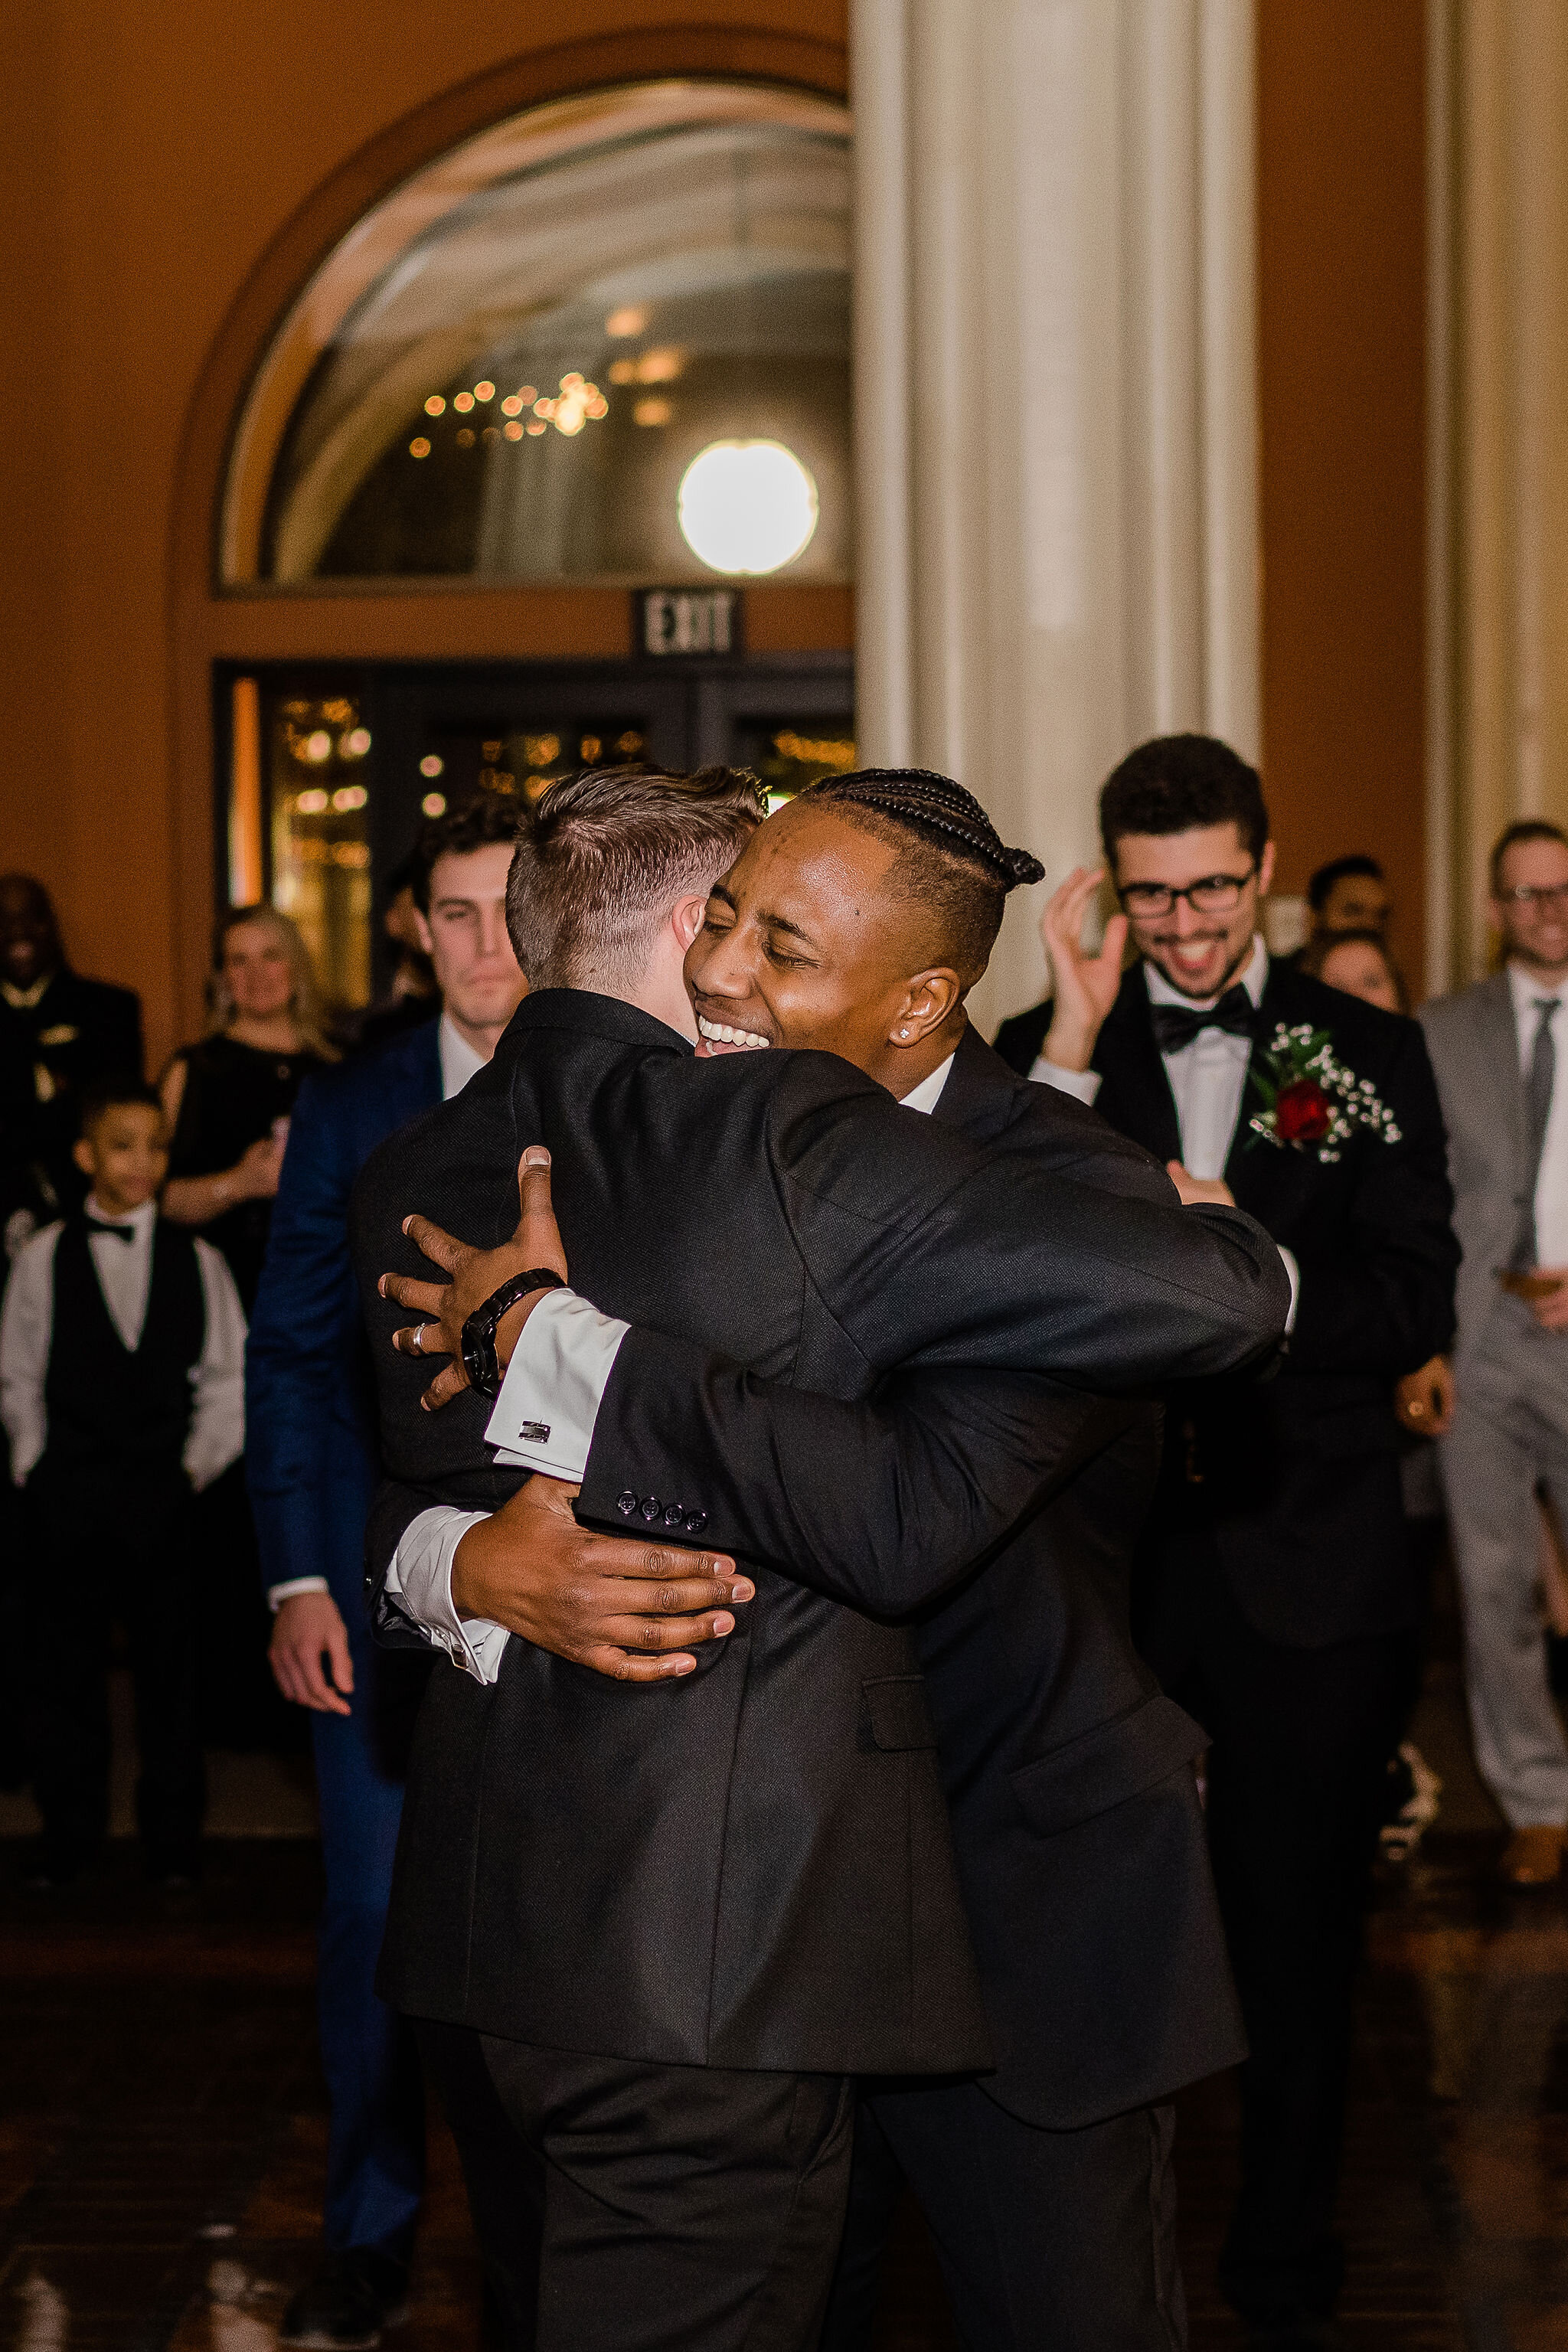 Groom hugging the wedding guest who caught the garter